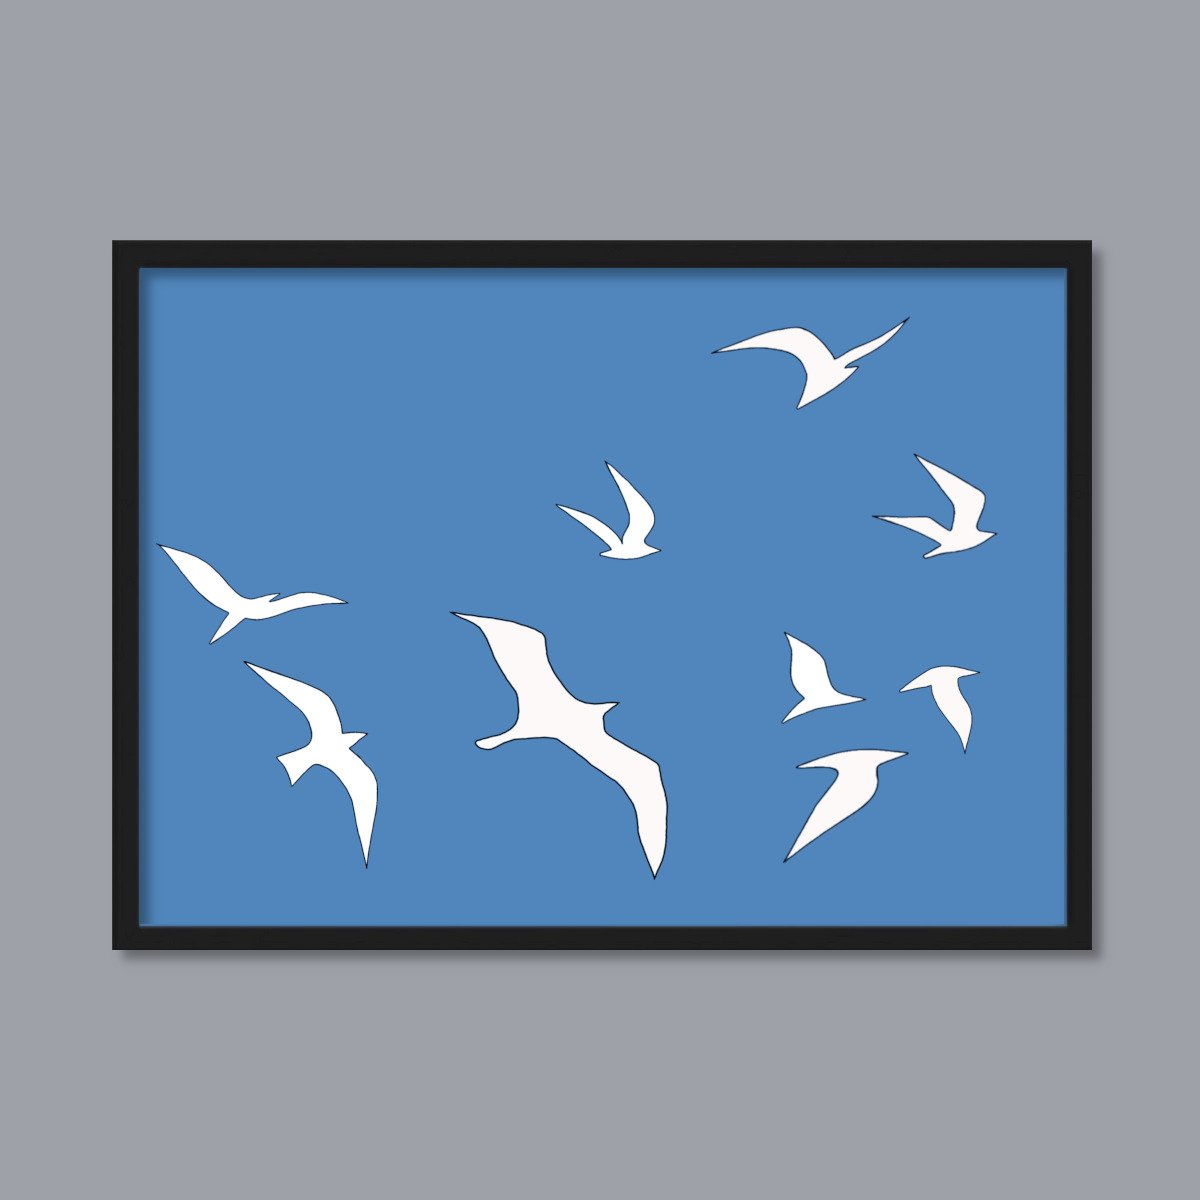 In the Sky #49 - Enhanced Matte Paper Framed Print - Ready to Hang by Marina Krylova